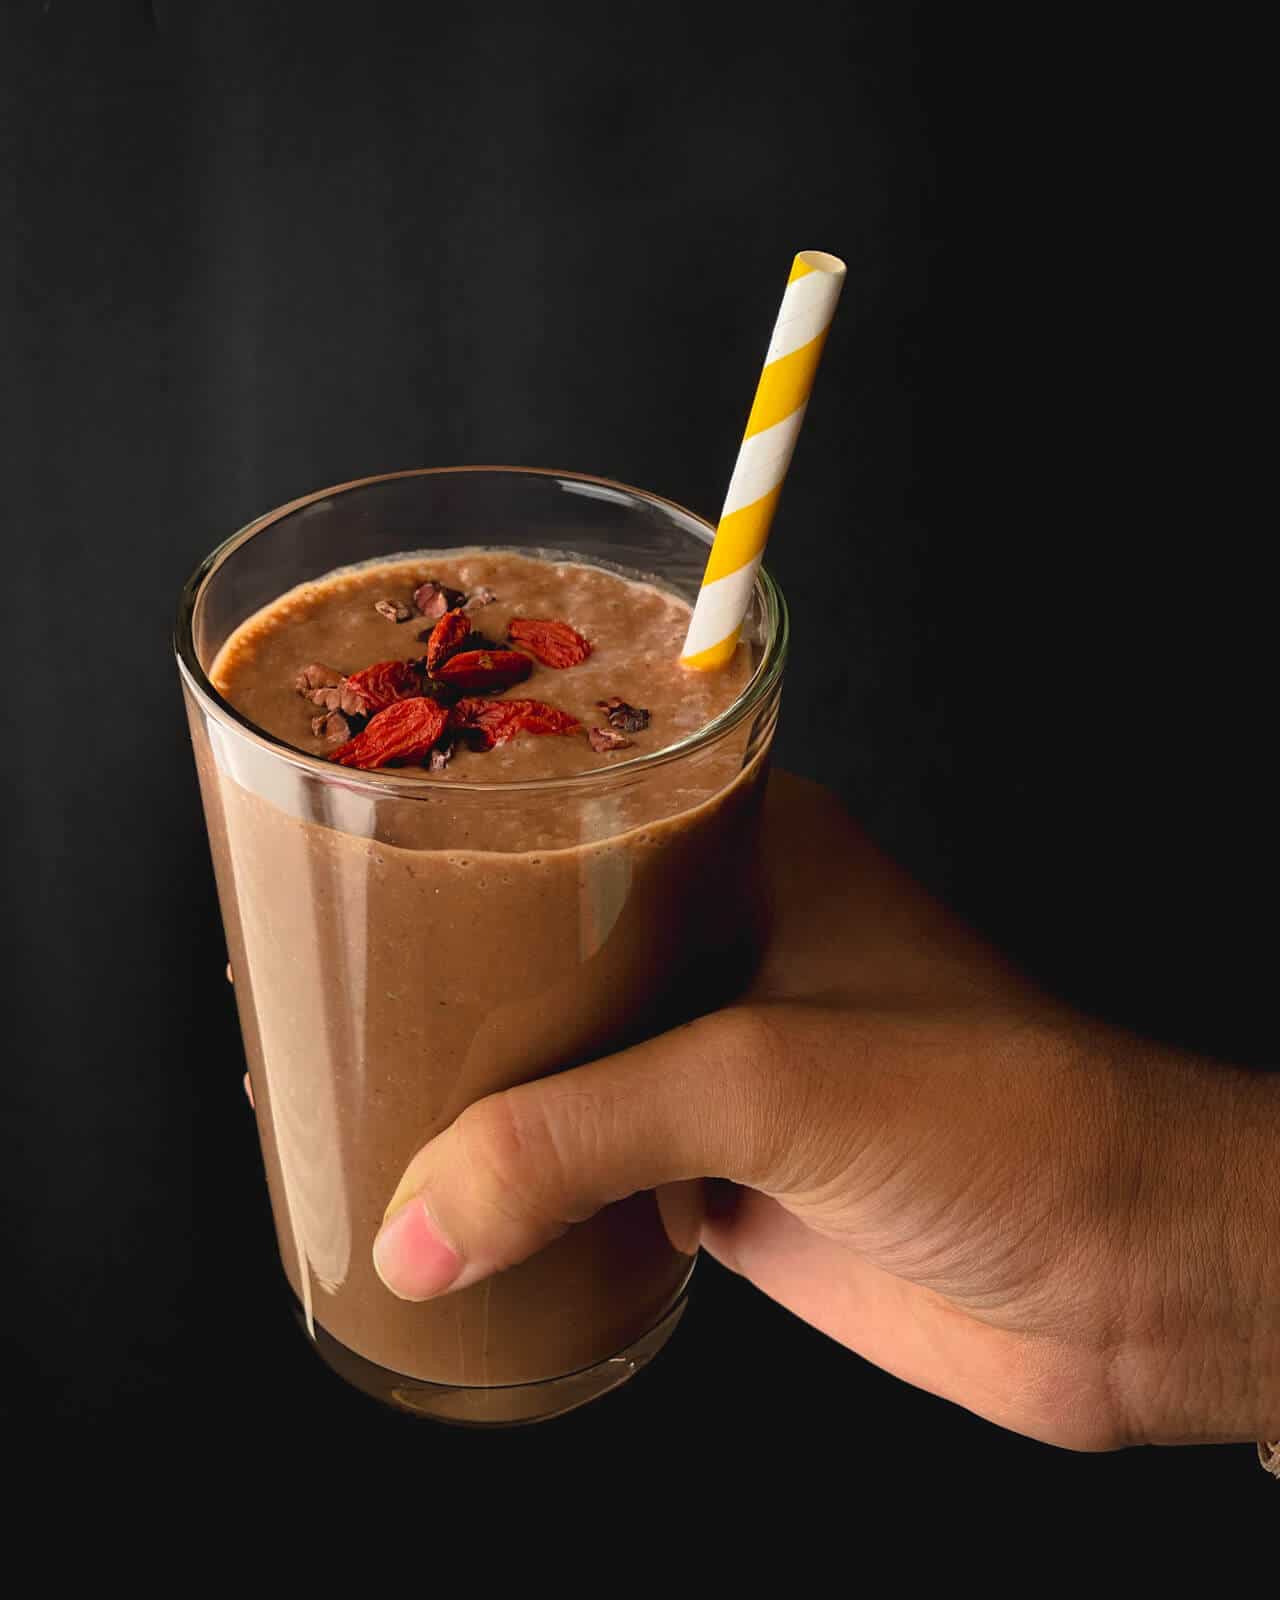 A hand holding a banana chocolate smoothie with goji berries on top and a yellow and white straw.